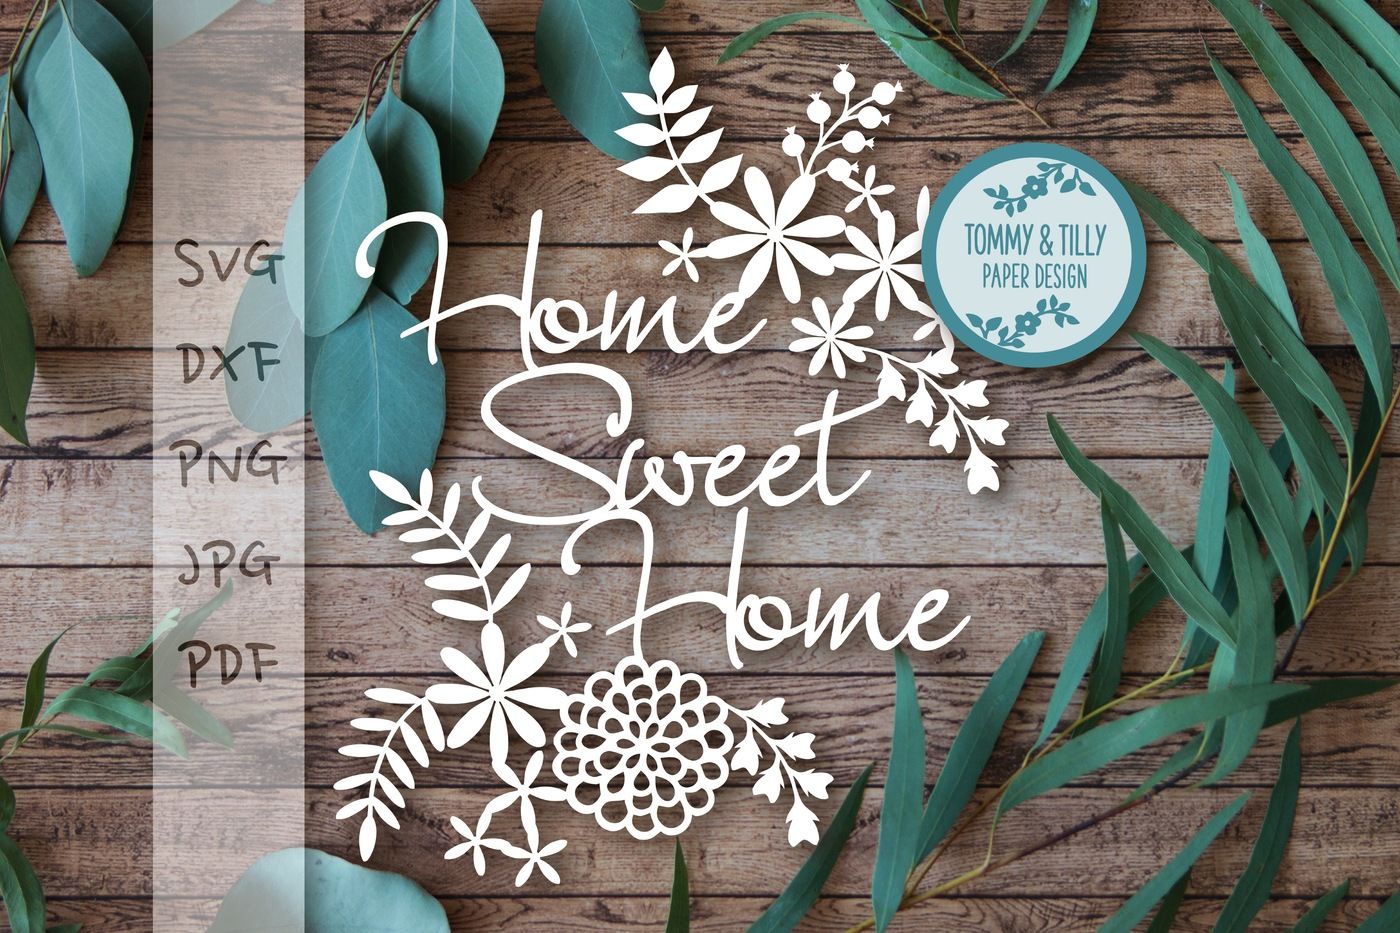 Home Sweet Home SVG DXF PNG PDF JPG By Tommy and Tilly ...